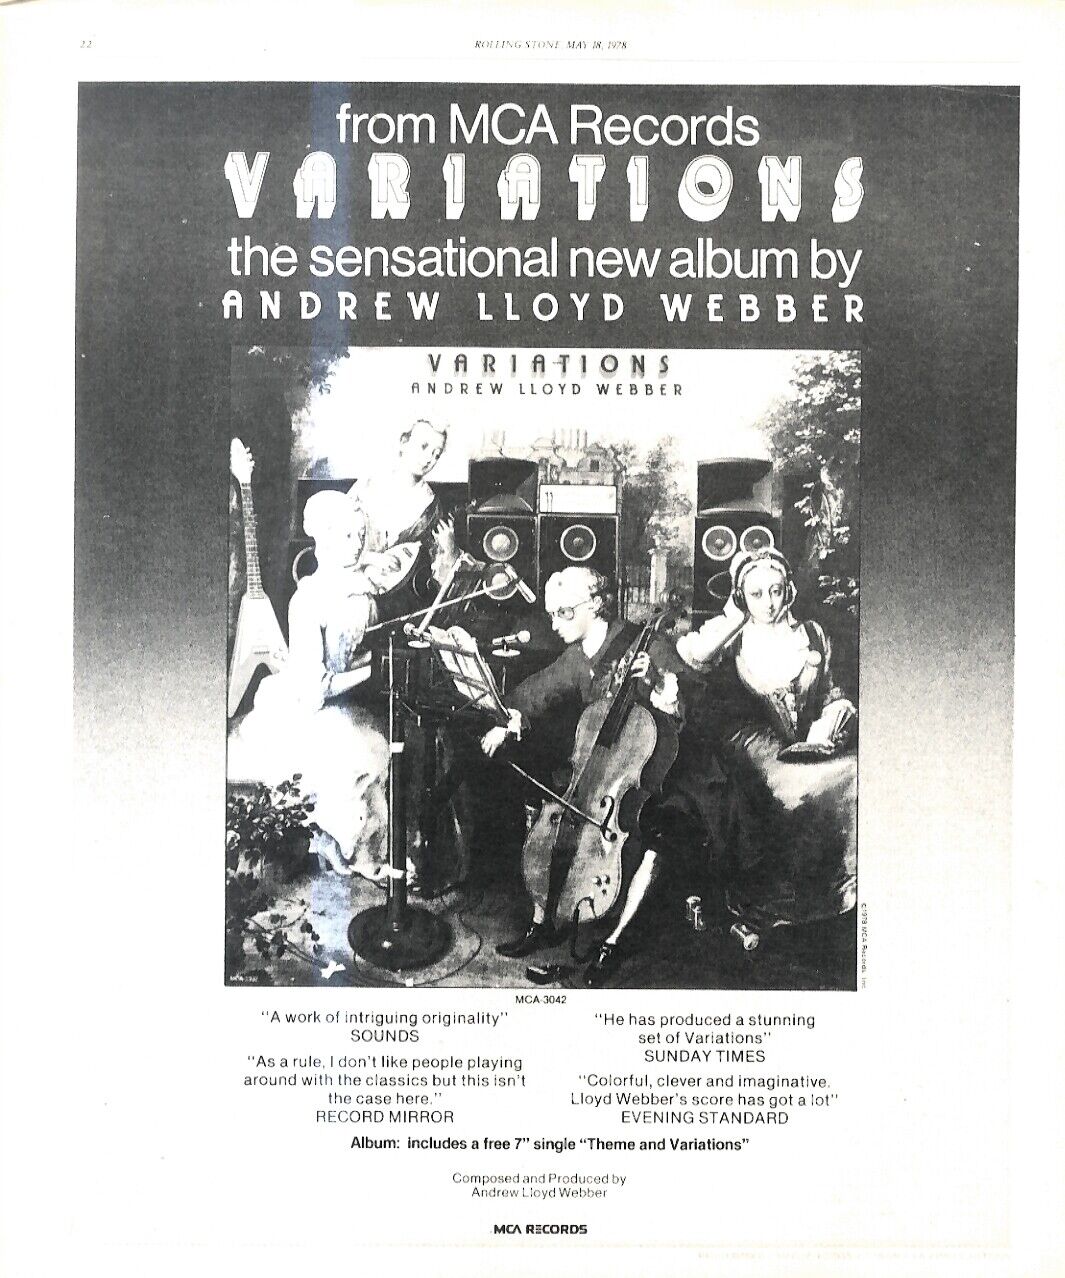 RST4 PICTURE/ADVERT 13X11 ANDREW LLOYD WEBBER : VARIATIONS